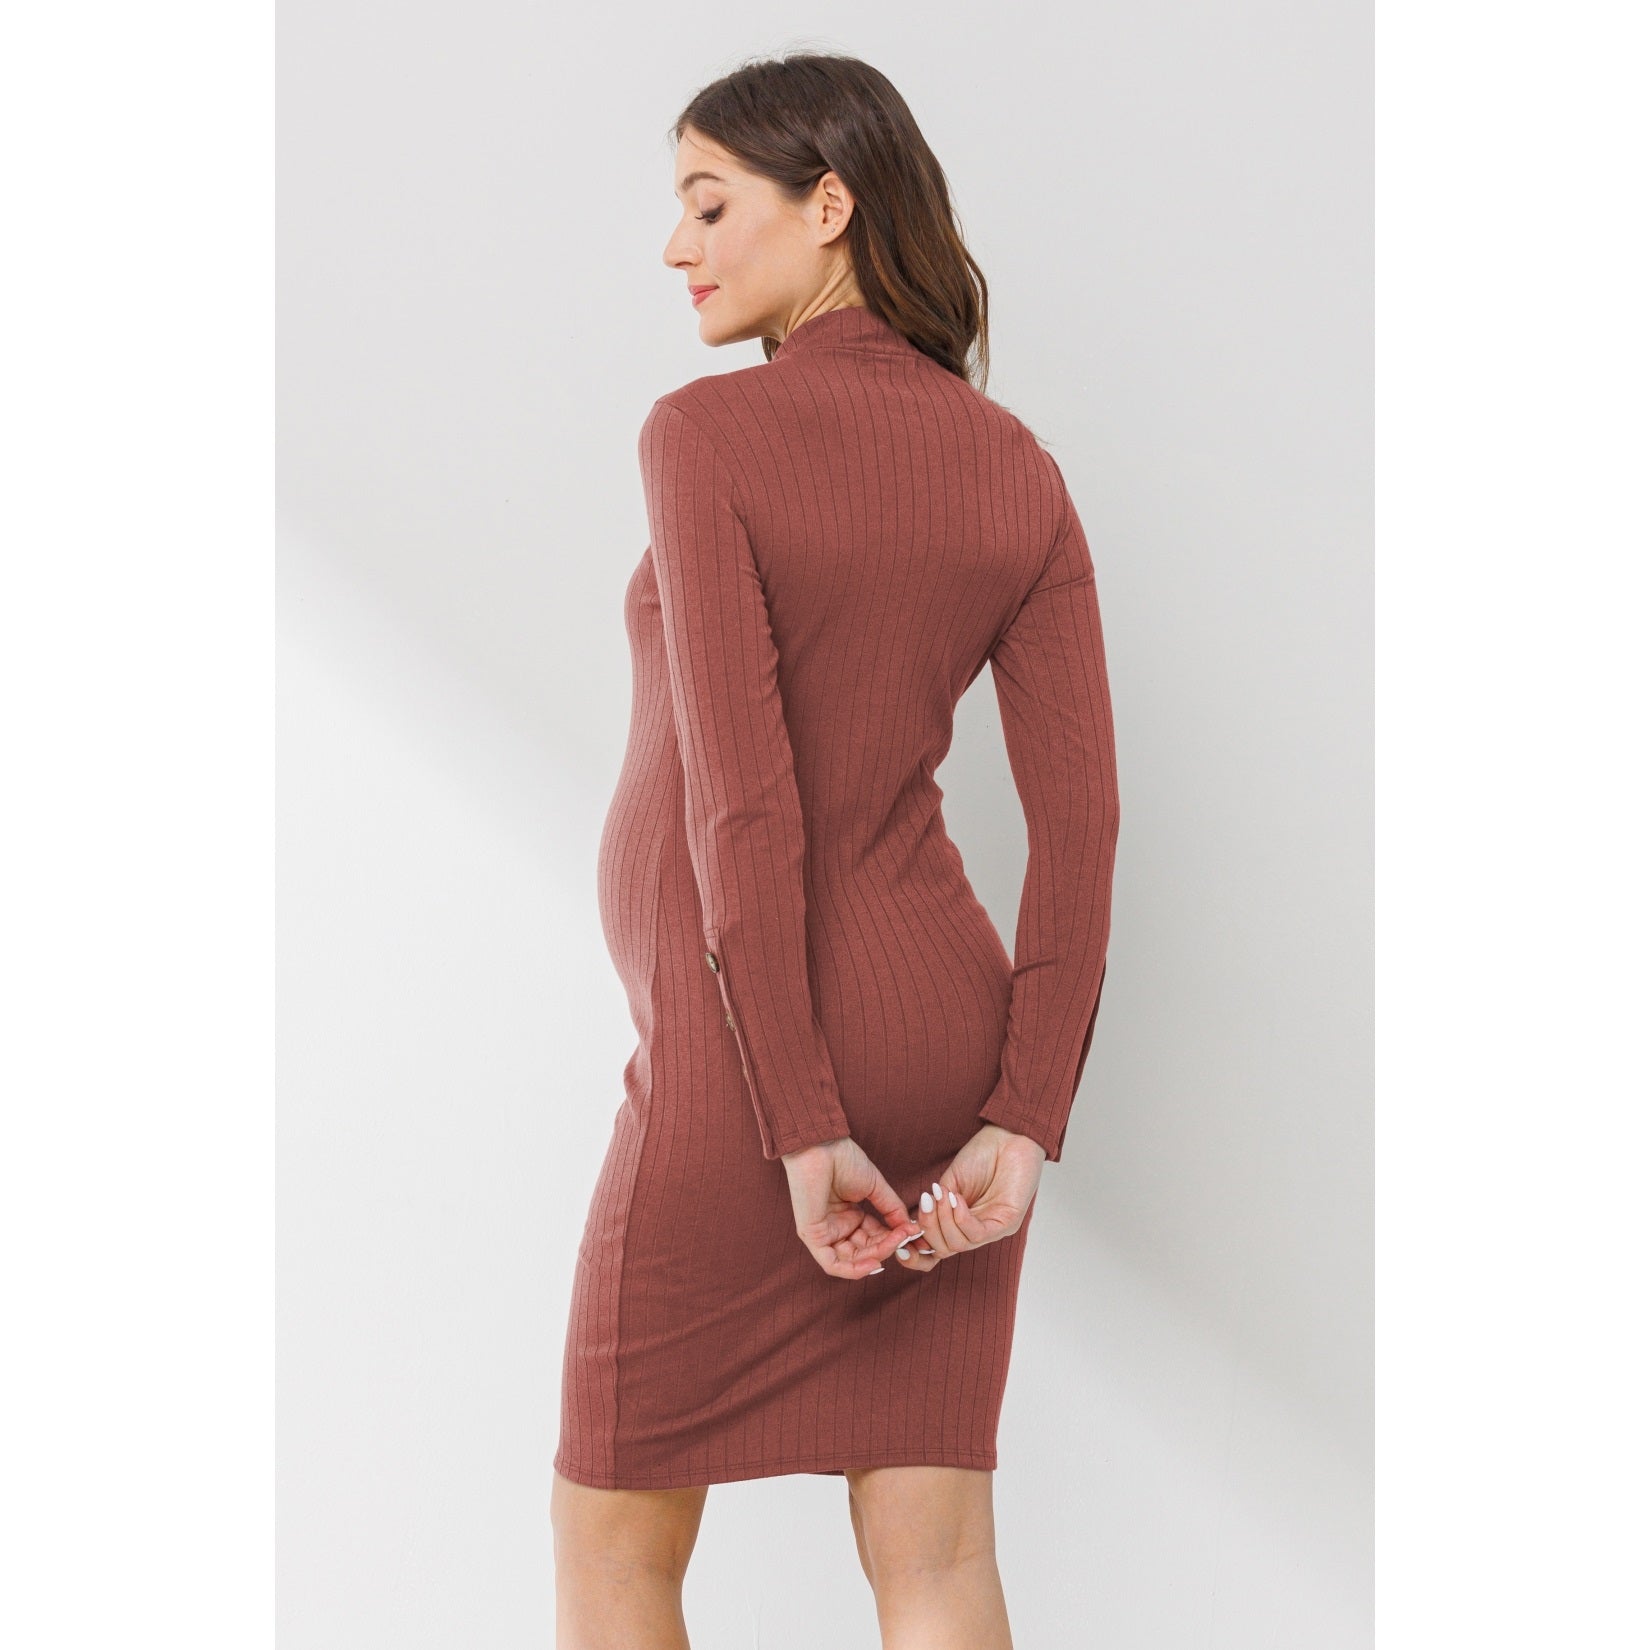 Ribbed Mock Neck Button Sleeve Maternity Dress in Rust  - Doodlebug's Children's Boutique